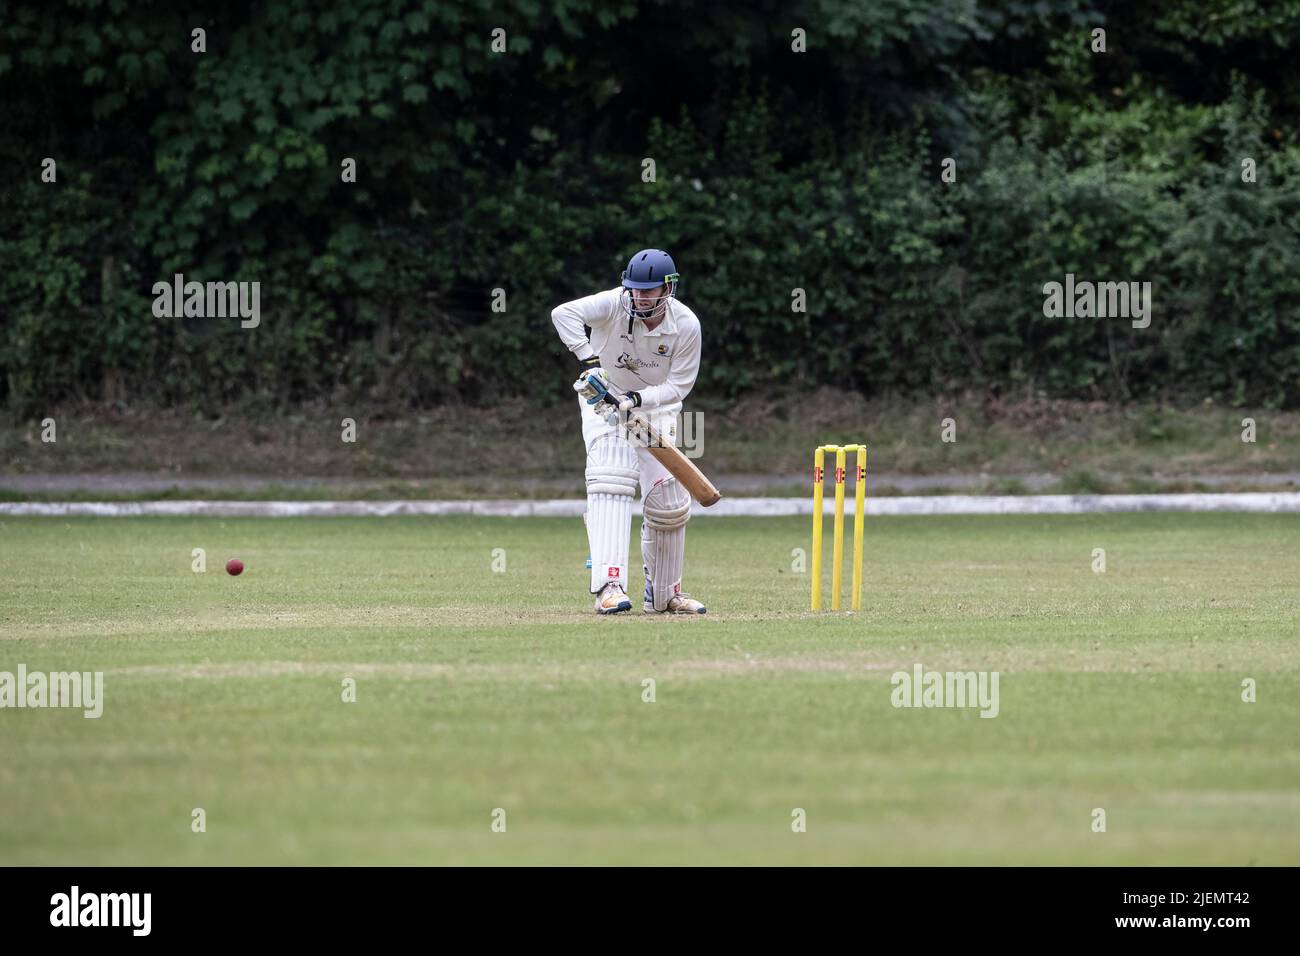 Left handed batsman preparing to play forward to a delivery in a village cricket match as the ball approaches Stock Photo